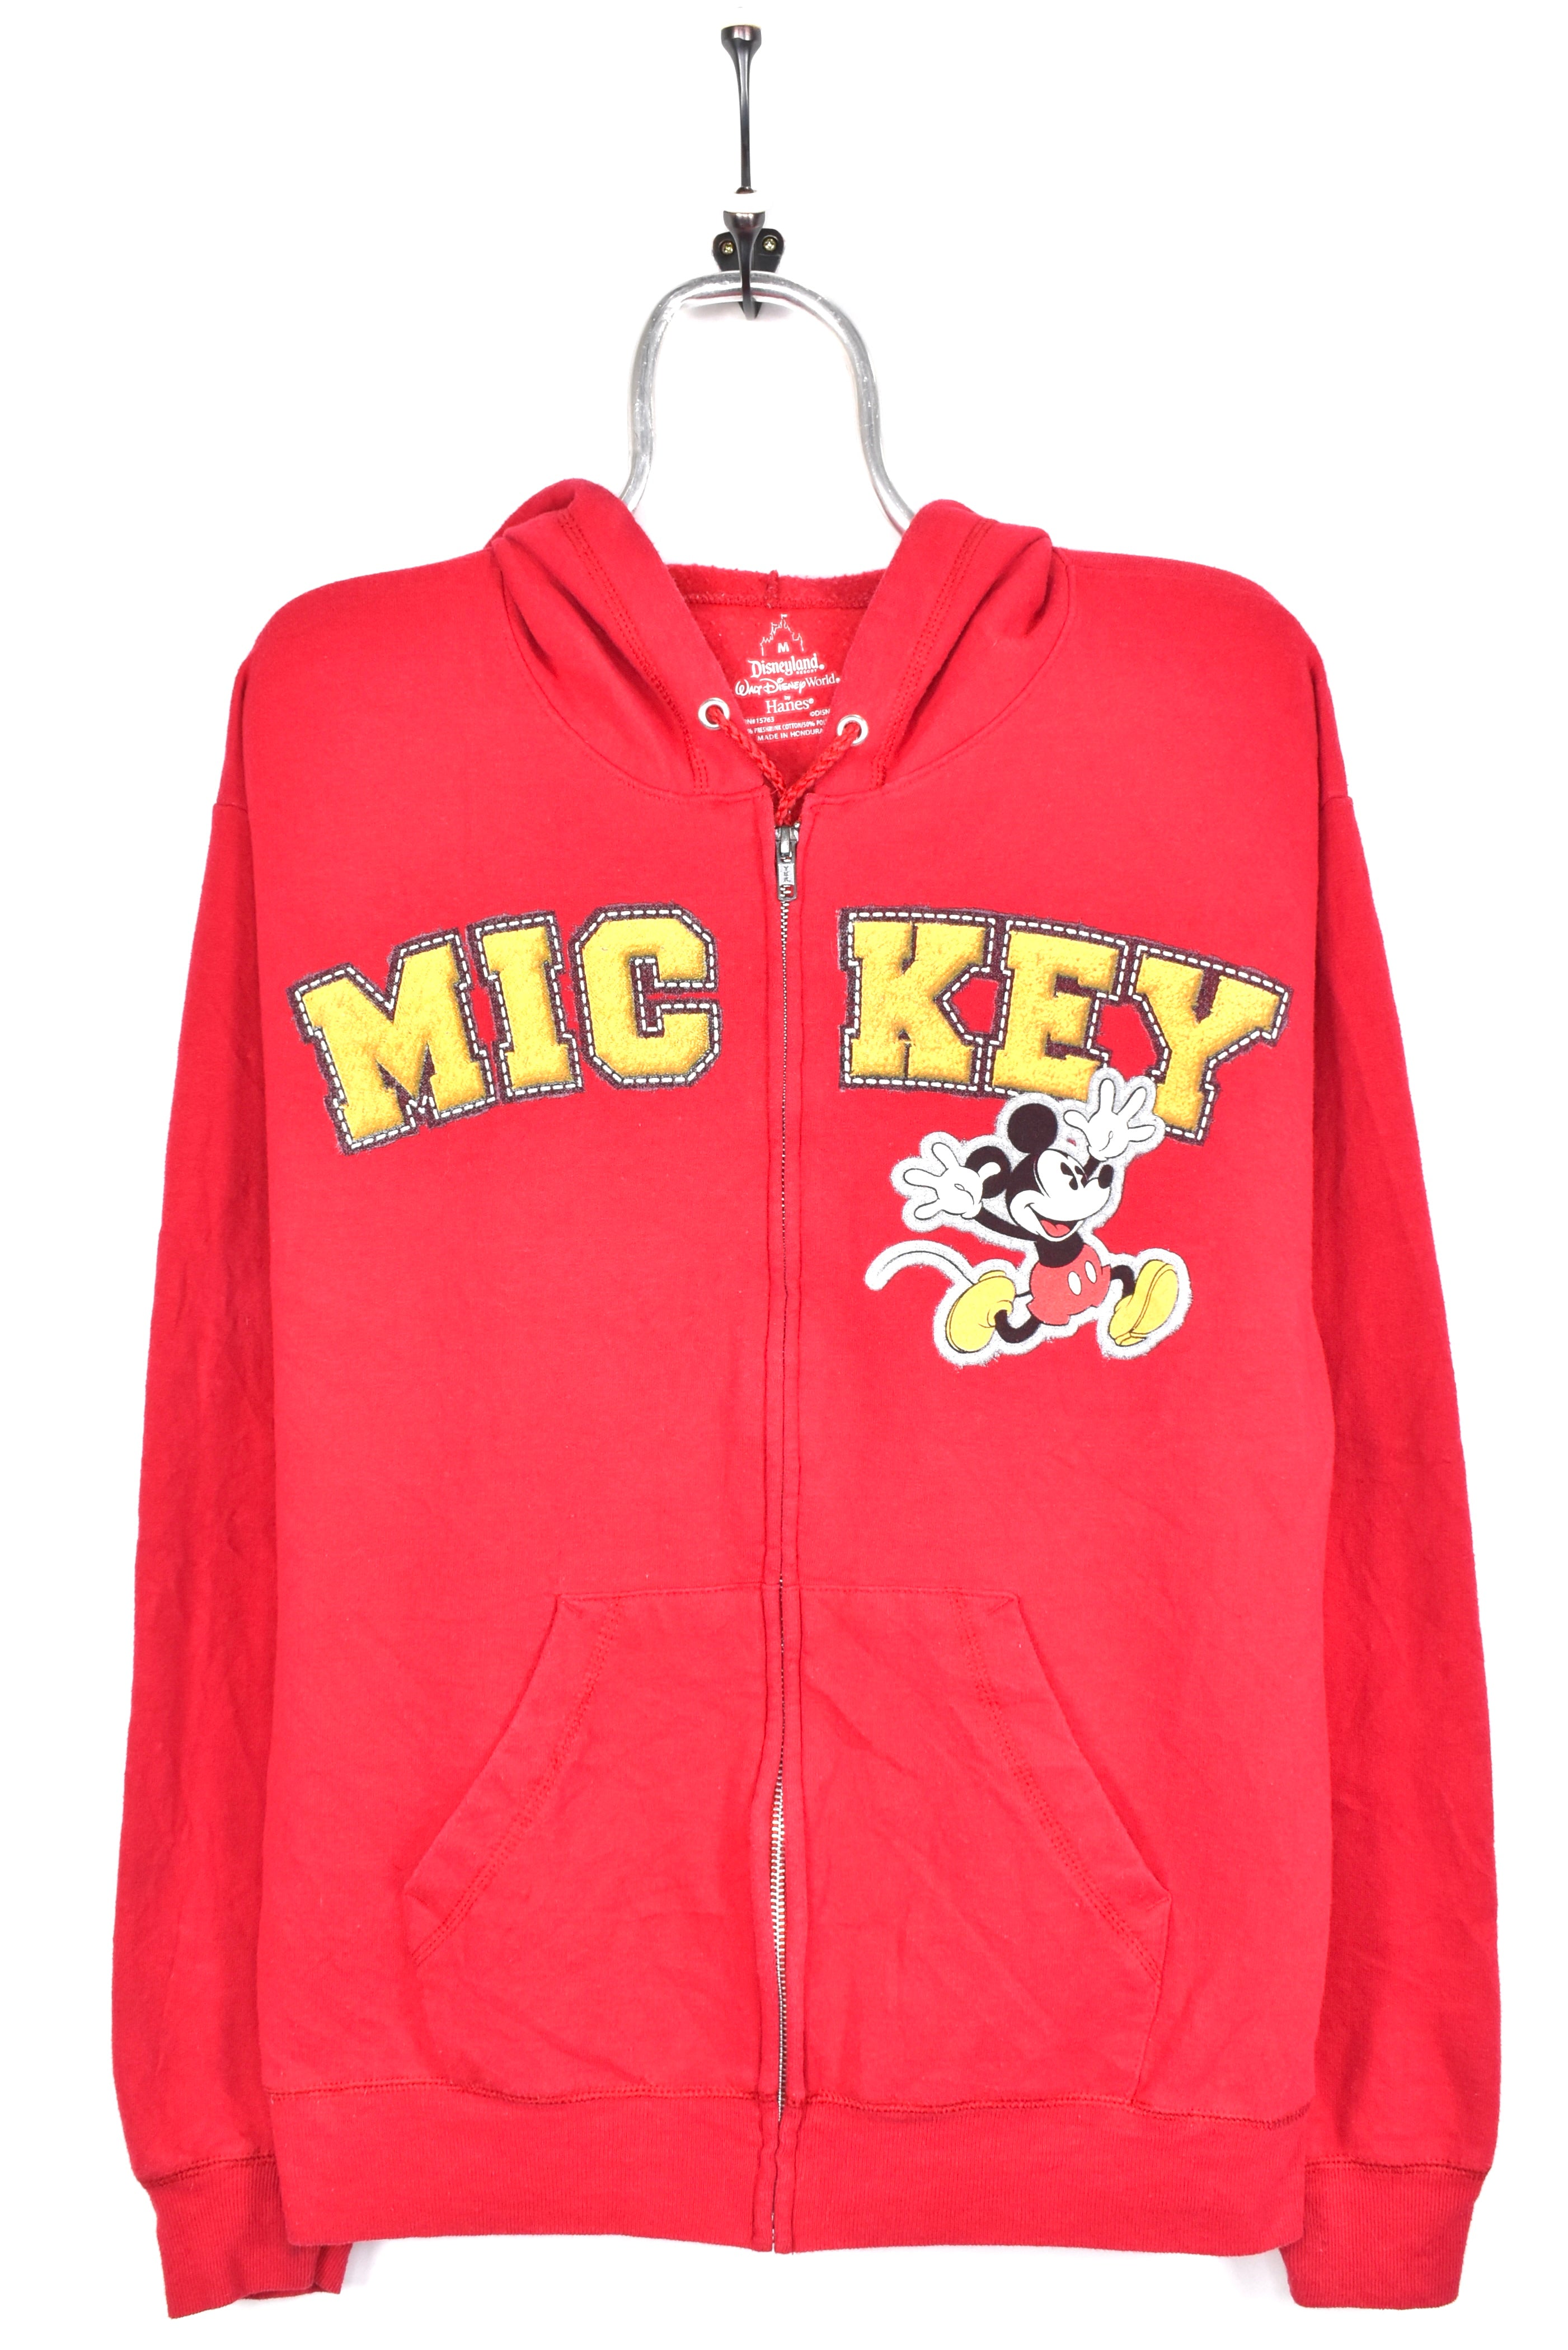 Disney VINTAGE Pull Over Embroidered Sweatshirt Size XL - $45